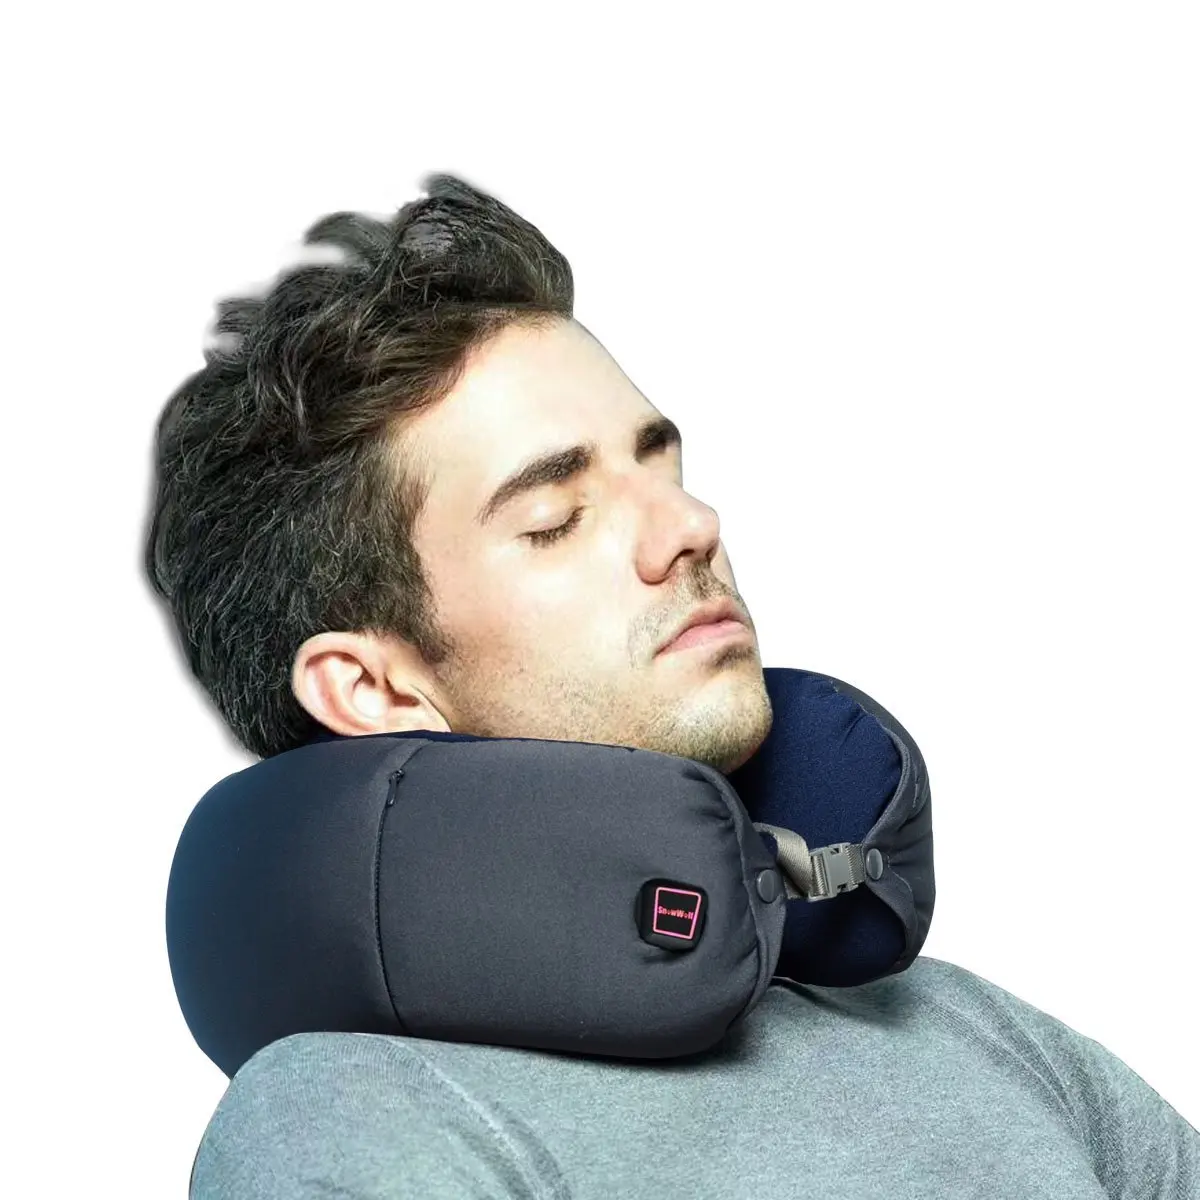 Cheap Heat Pad For Neck Pain, find Heat 